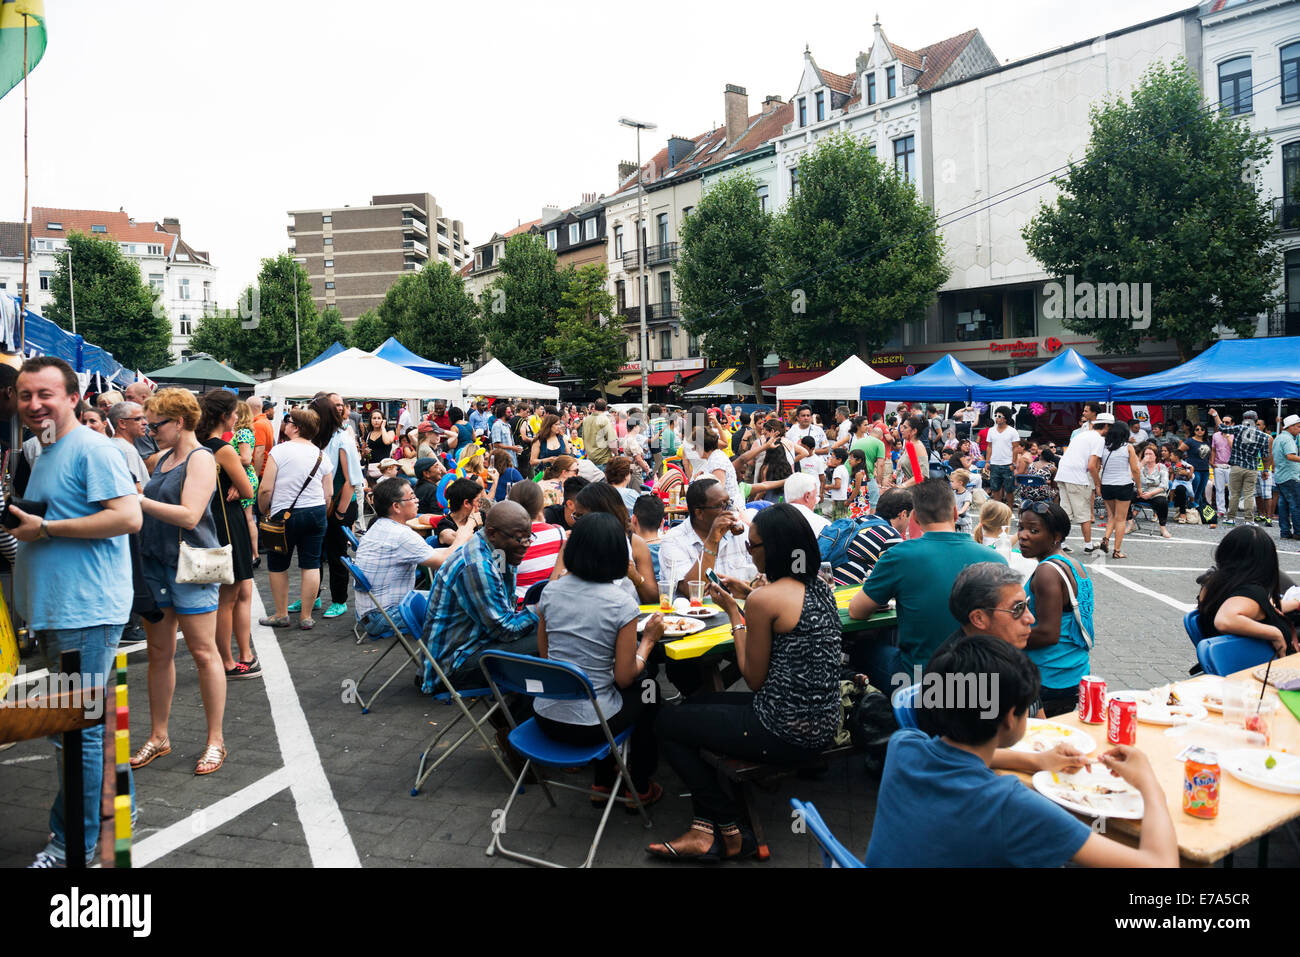 Crowed enjoying a Latin festival in Place Jourdane in the center of Brussels. Stock Photo